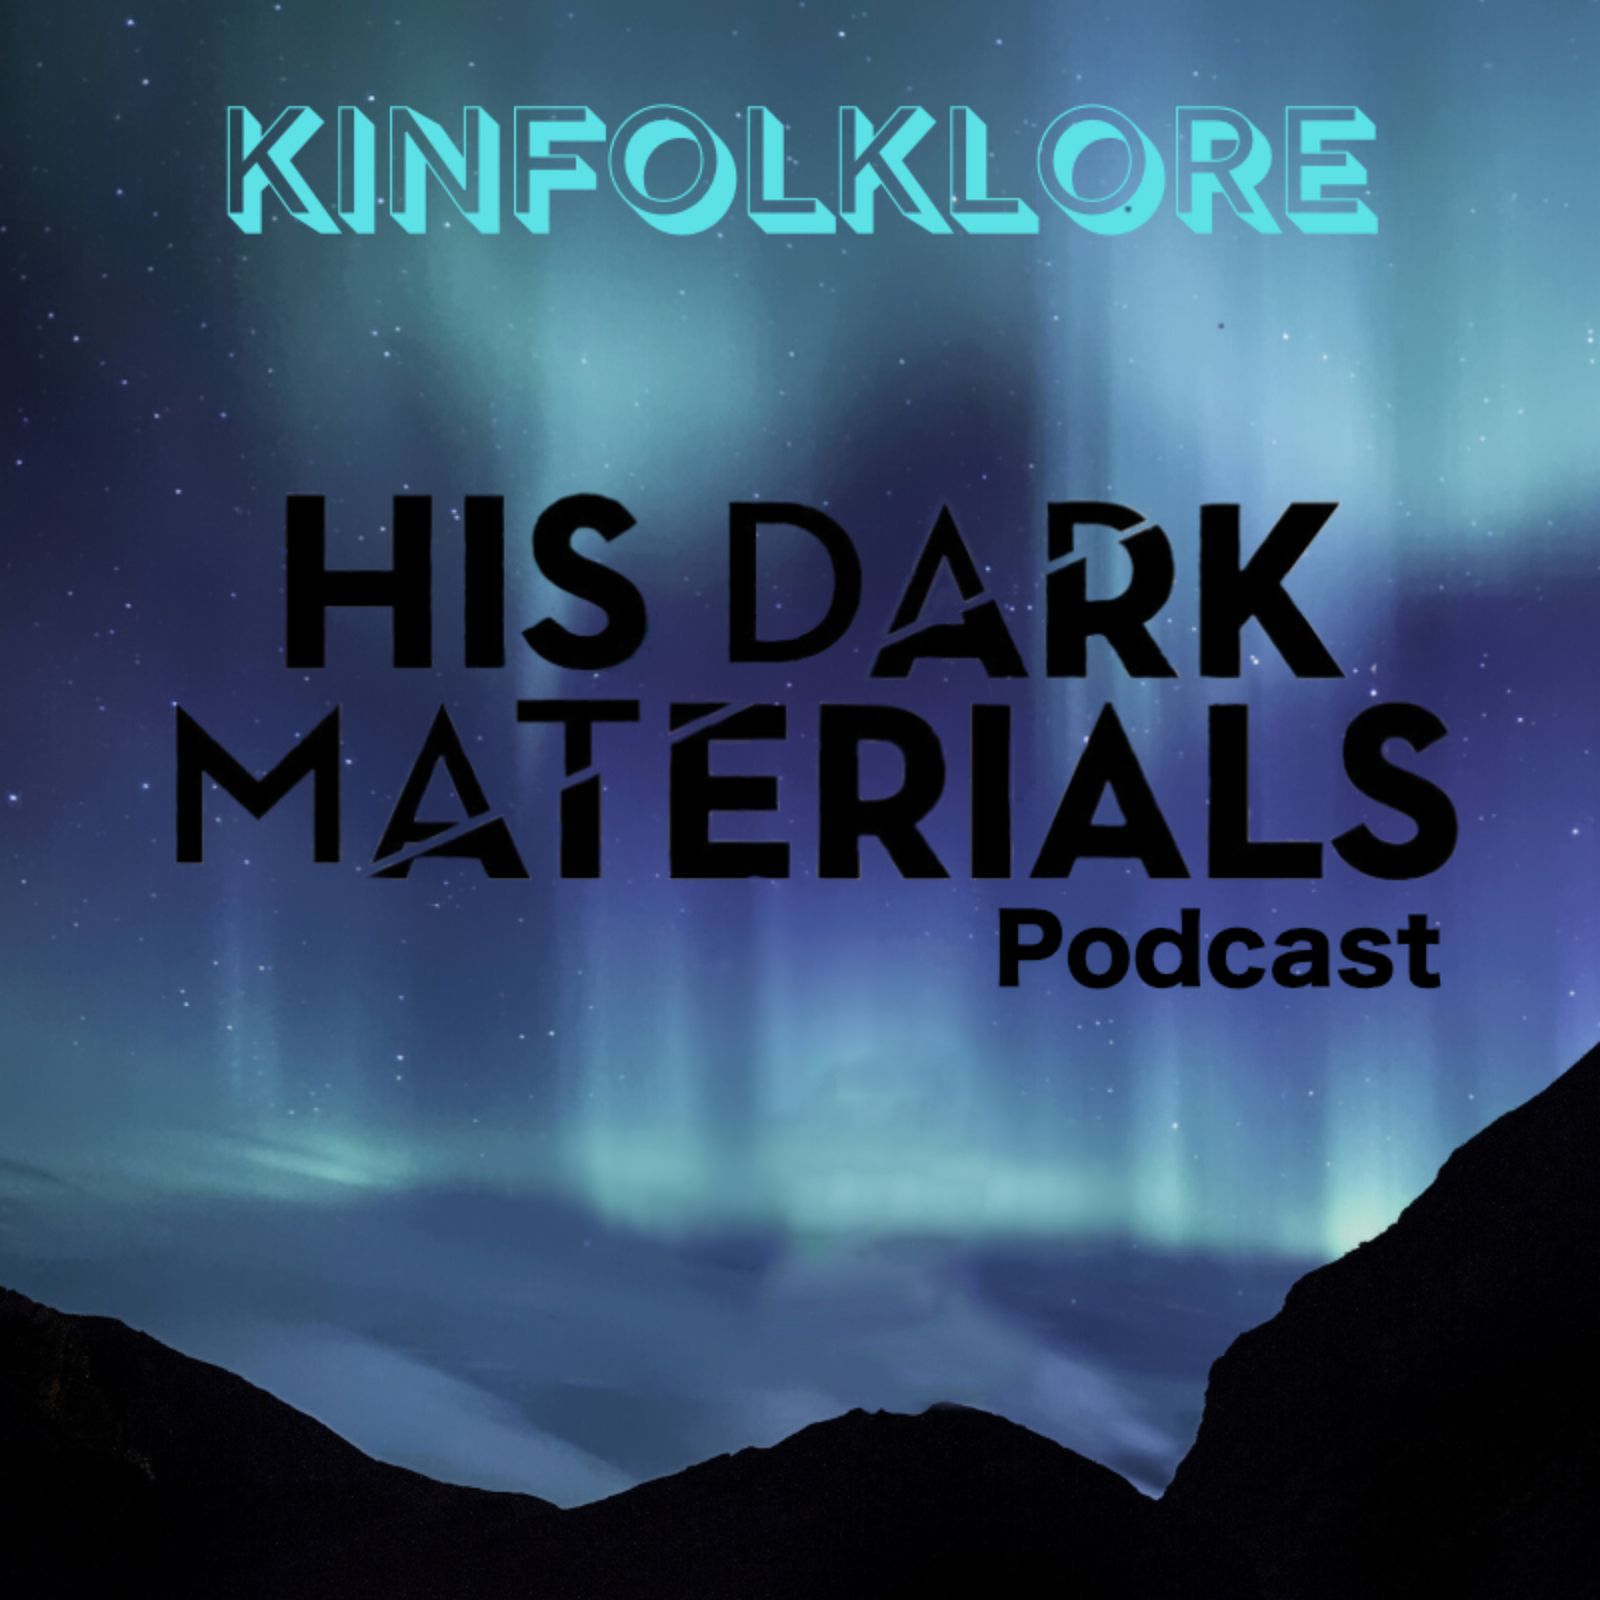 S5 Ep2: Kinfolklore: His Dark Materials Sn.2 Episode 2 (The Cave)